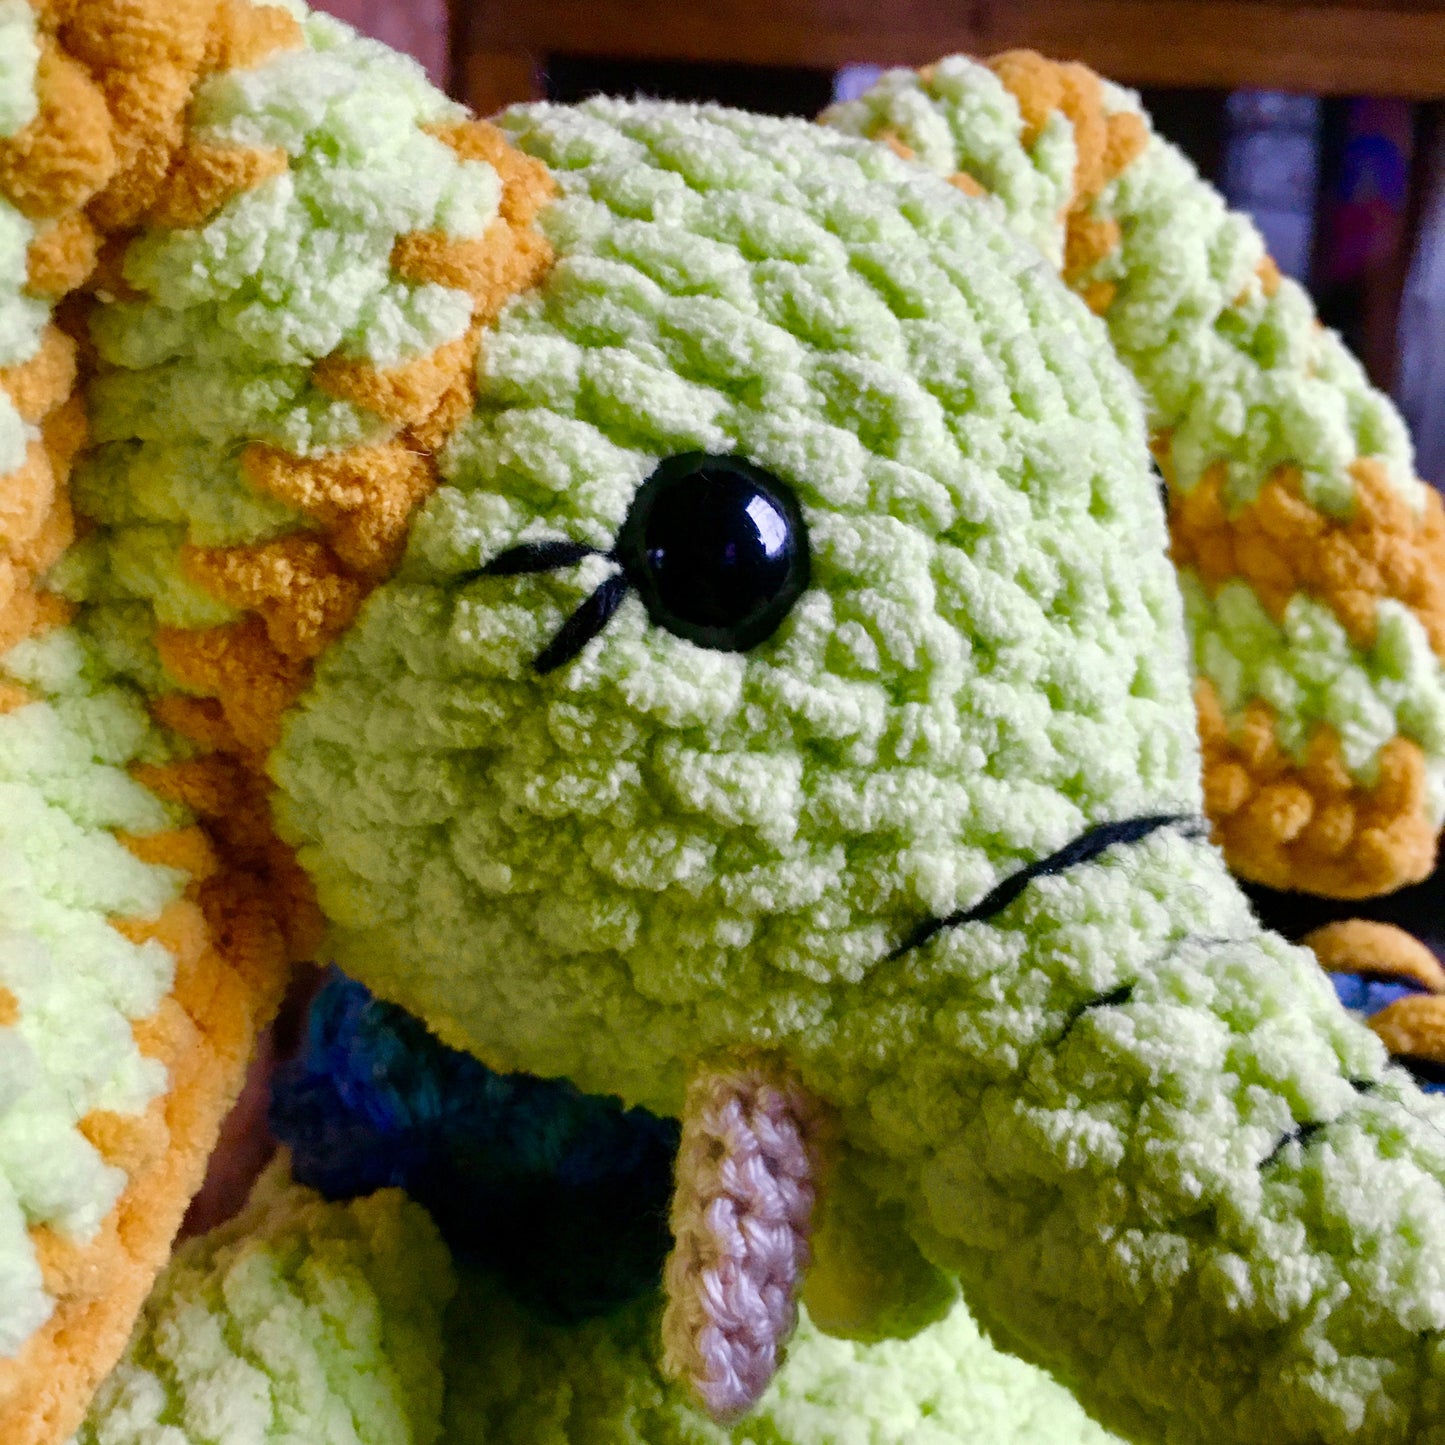 API THE LIME GREEN ELEPHANT with big belly, can be personalized as a BIRTH DOGGIE